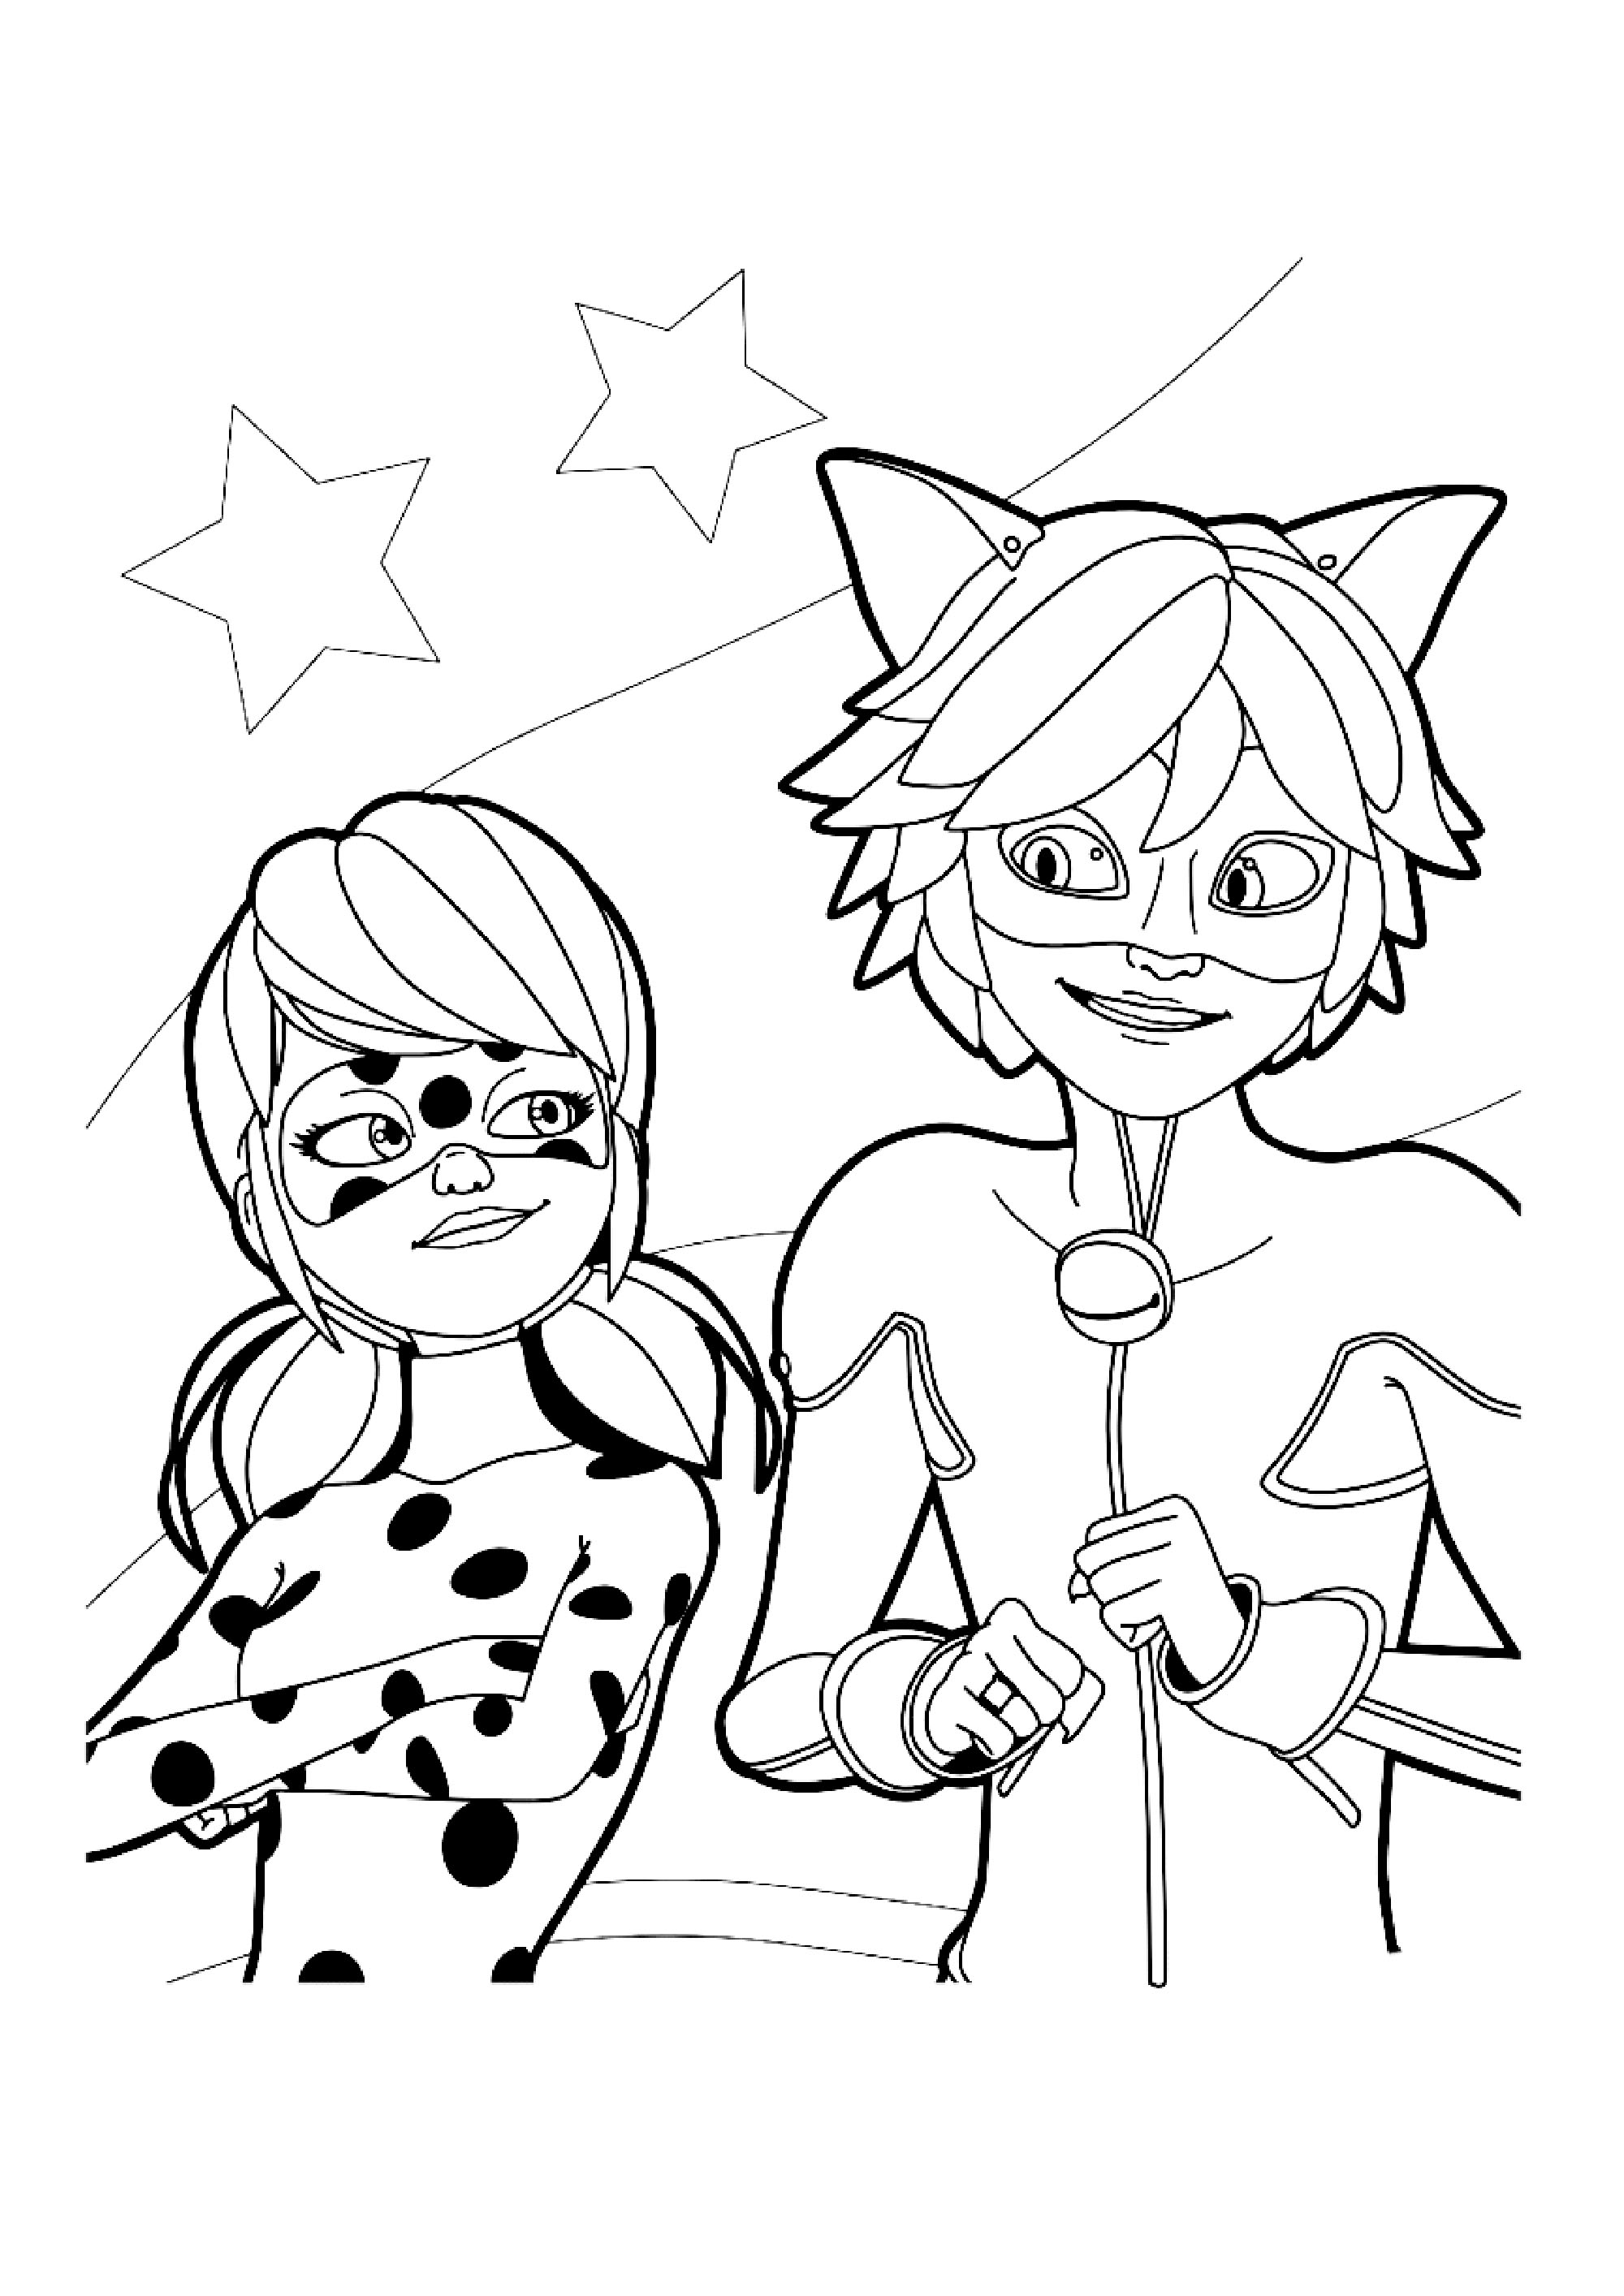 Miraculous lady bug to color for kids - Miraculous / LadyBug Kids Coloring  Pages